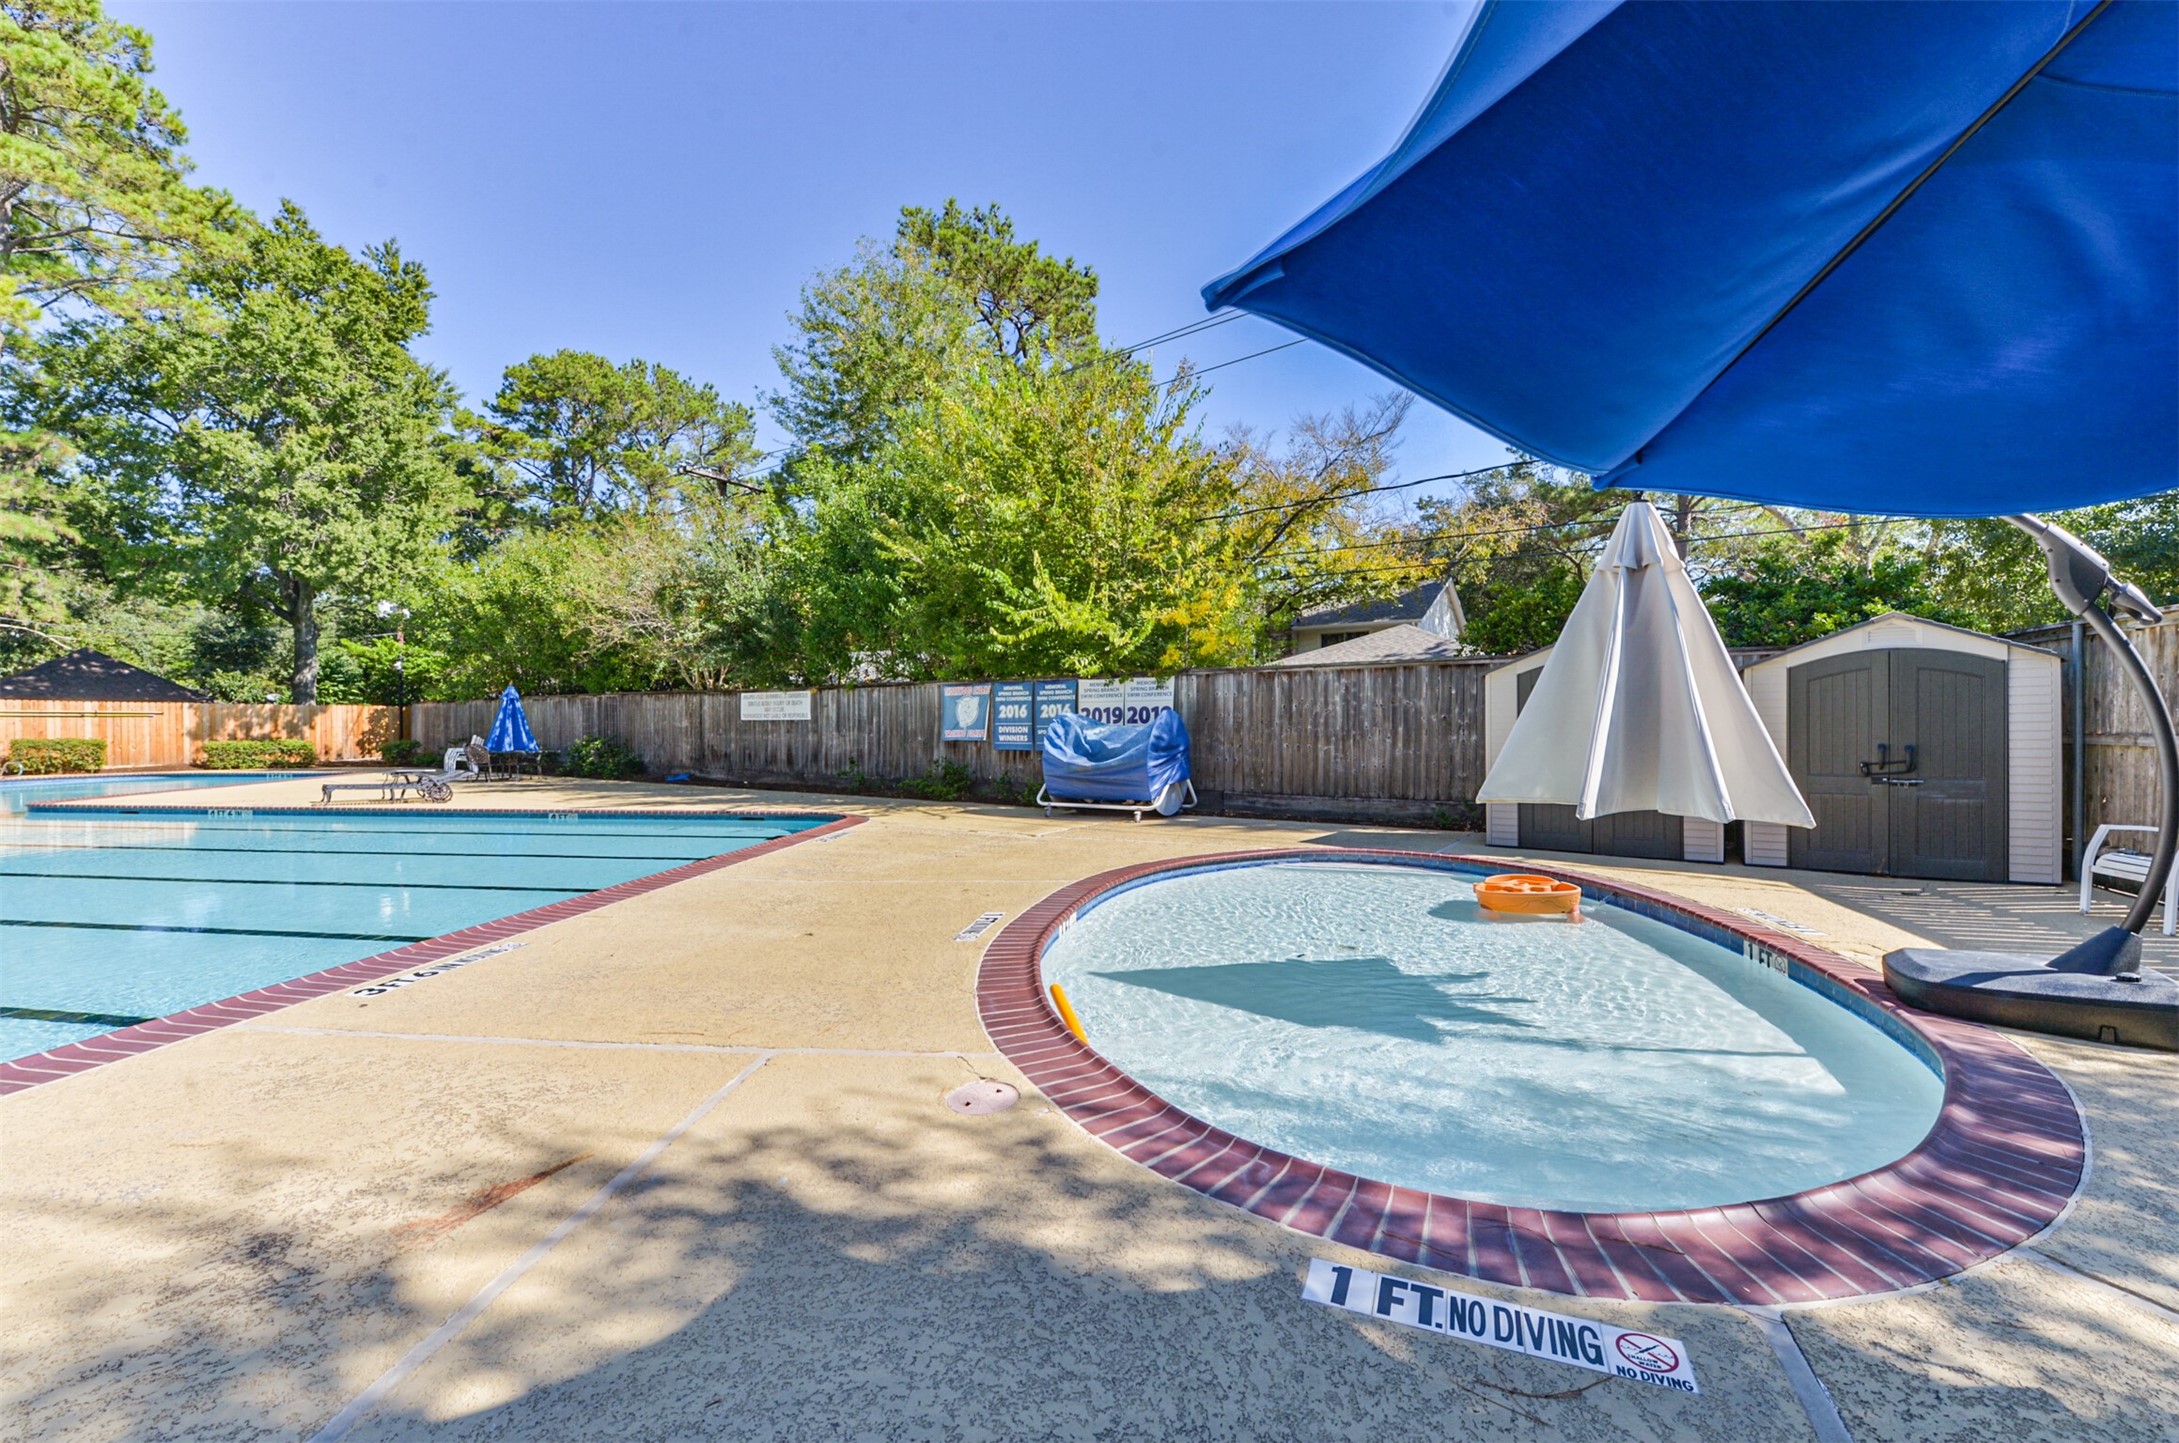 The neighborhood pool has a baby pool also. There is also a newly updated gated playground area located by the other two sections of Thornwood next to the second neighborhood pool and the clubhouse.